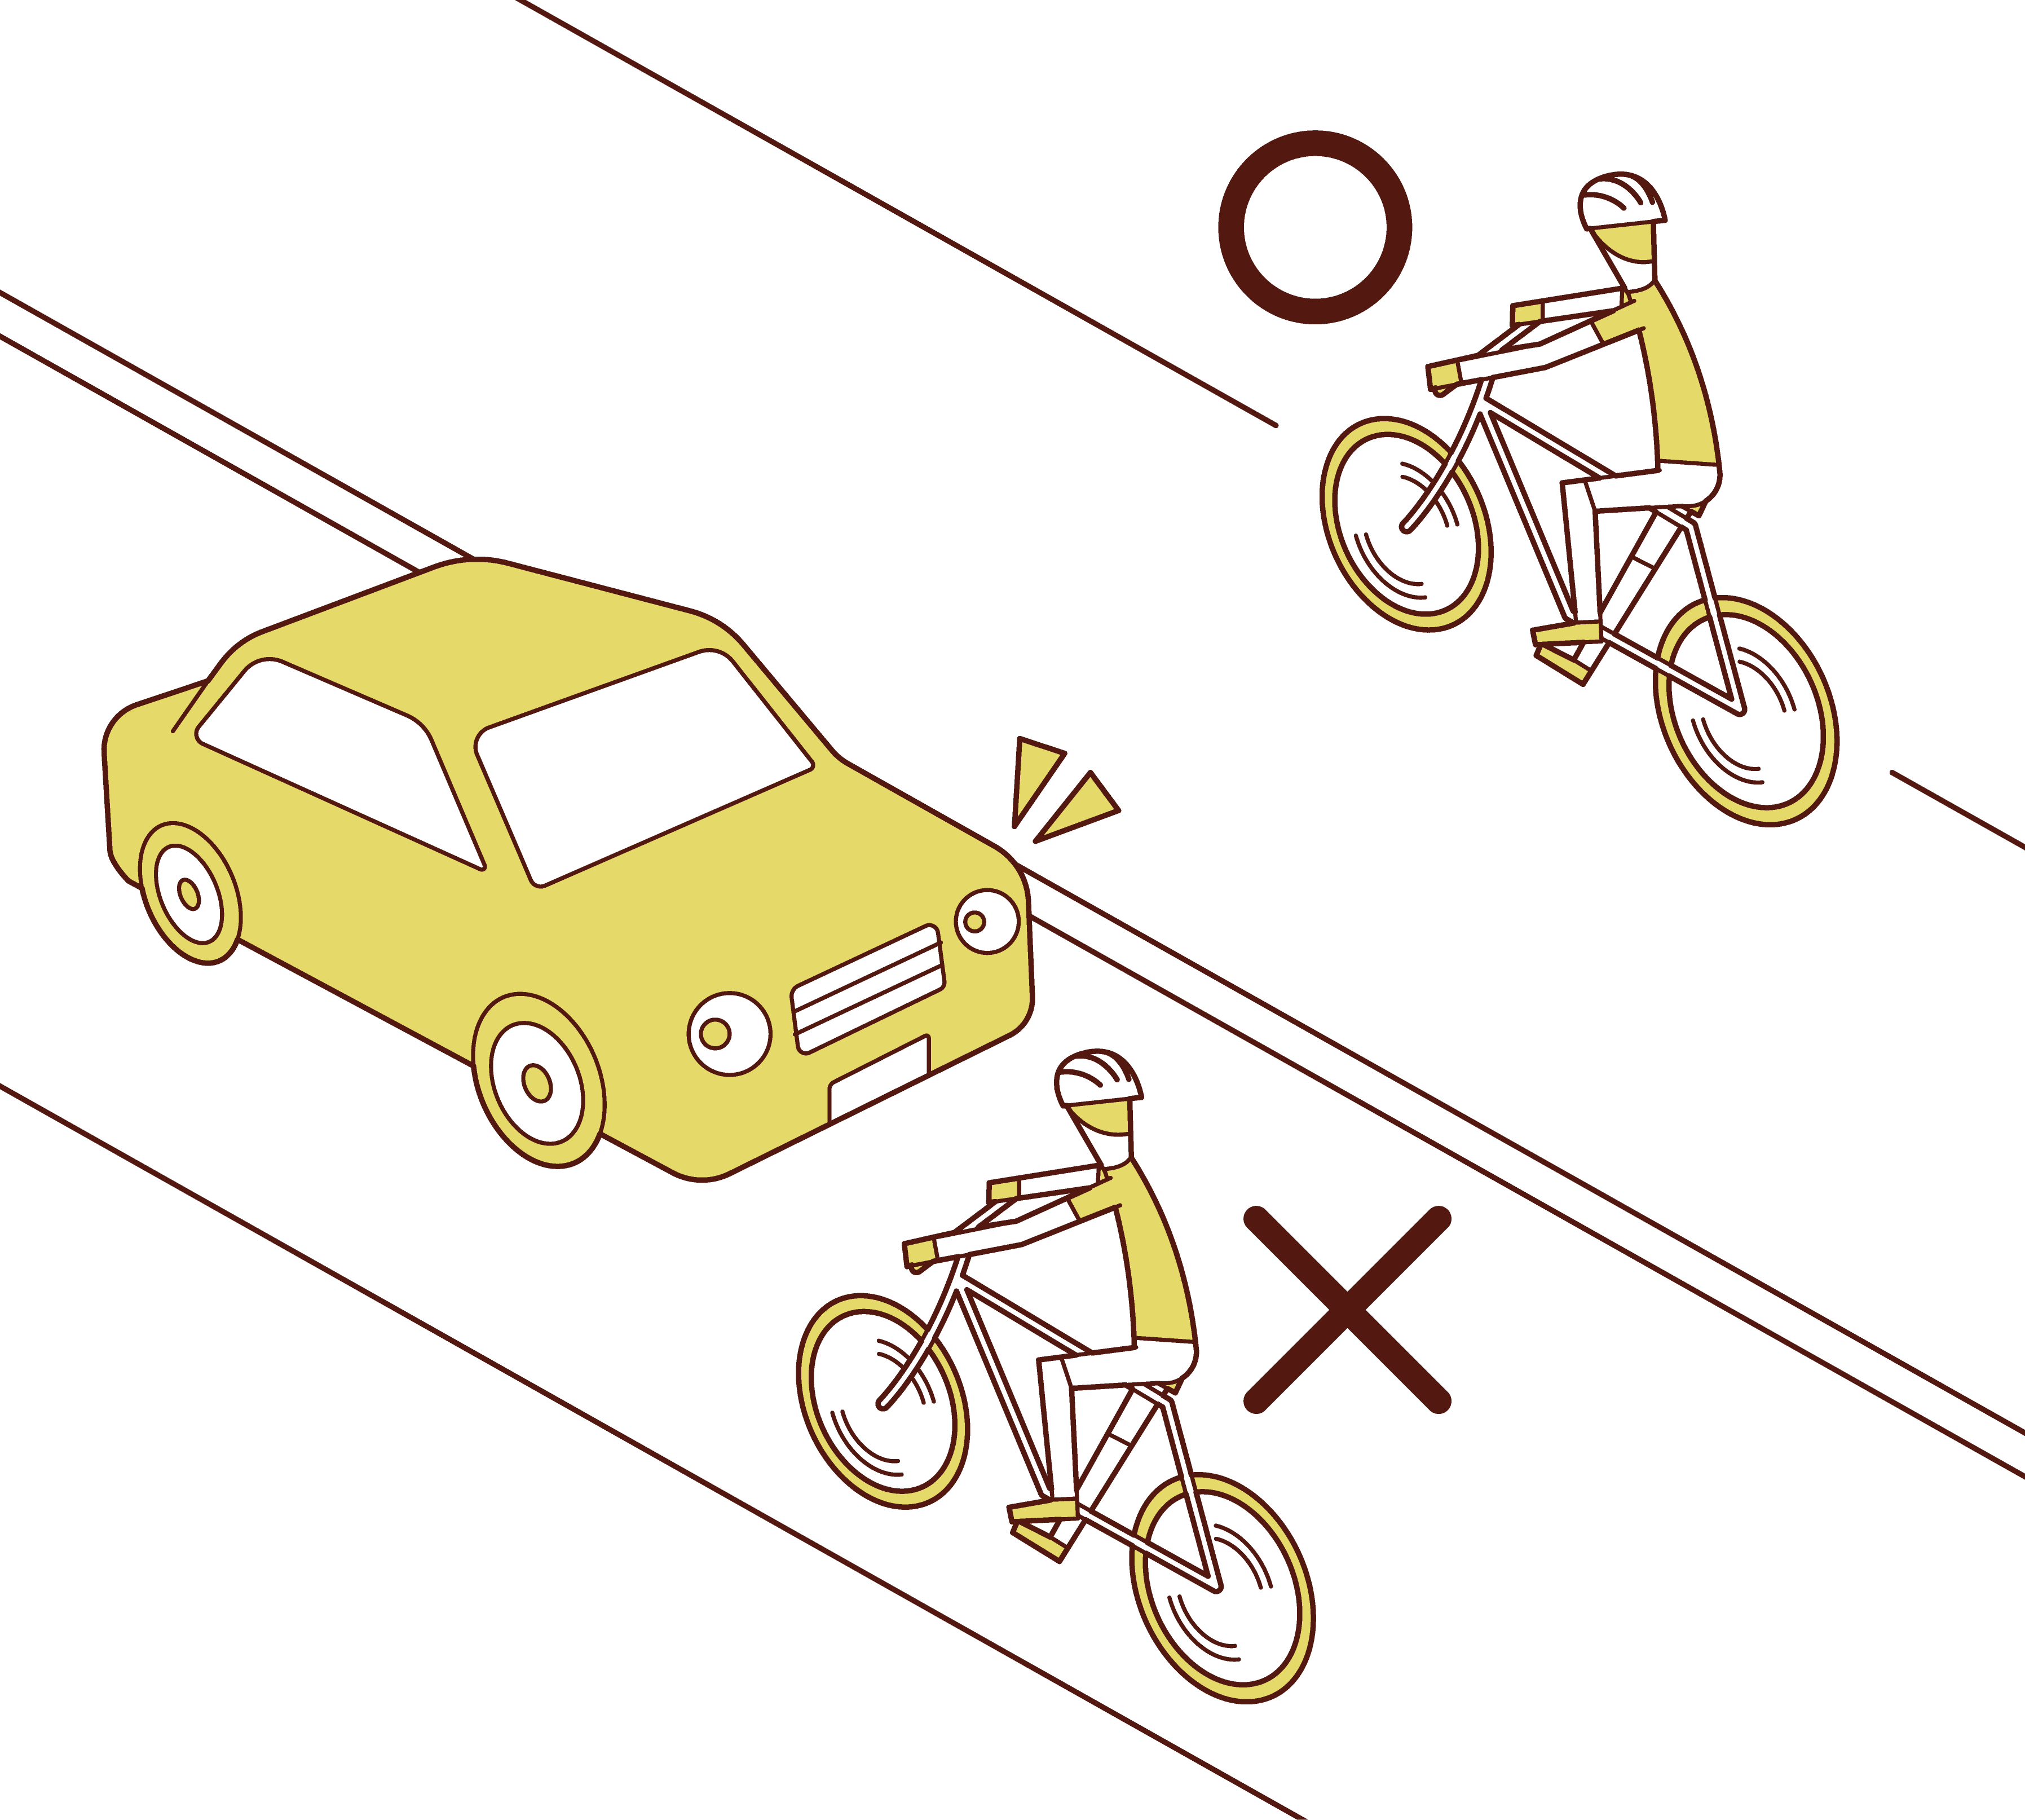 Illustration of bicycle traffic rules